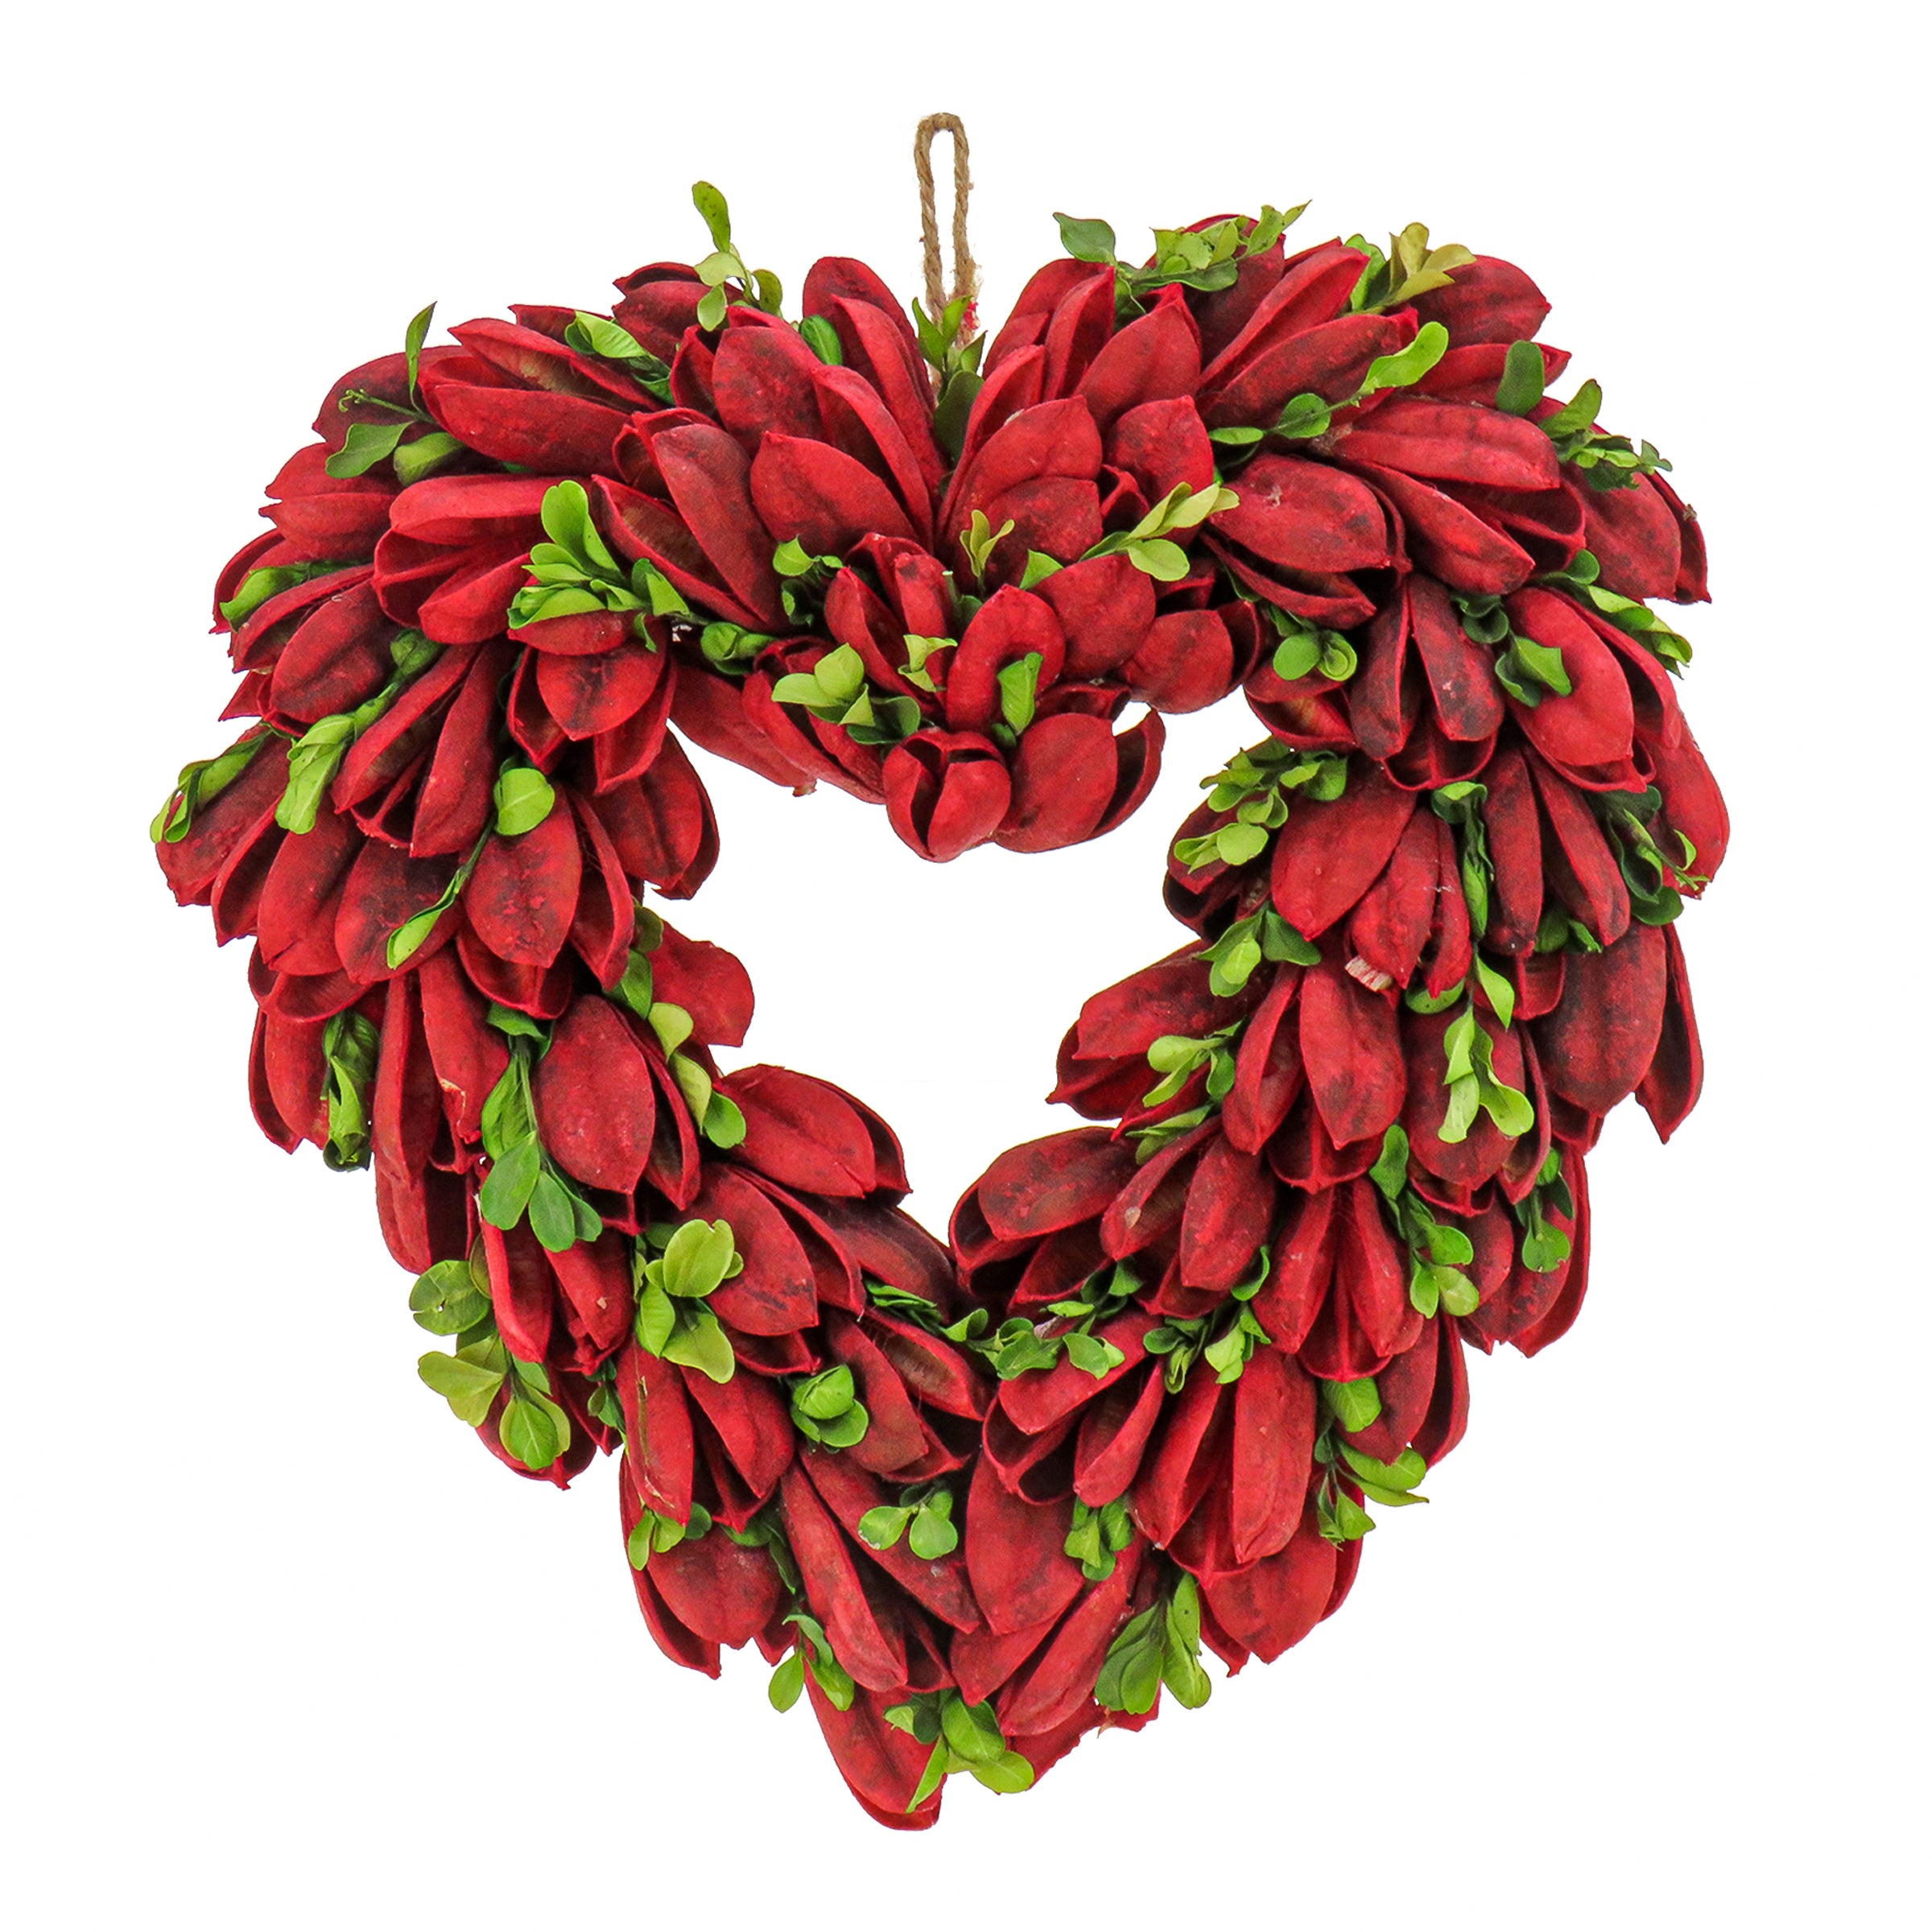 Artificial Valentine's Floral Heart Wreath, Decorated with Red